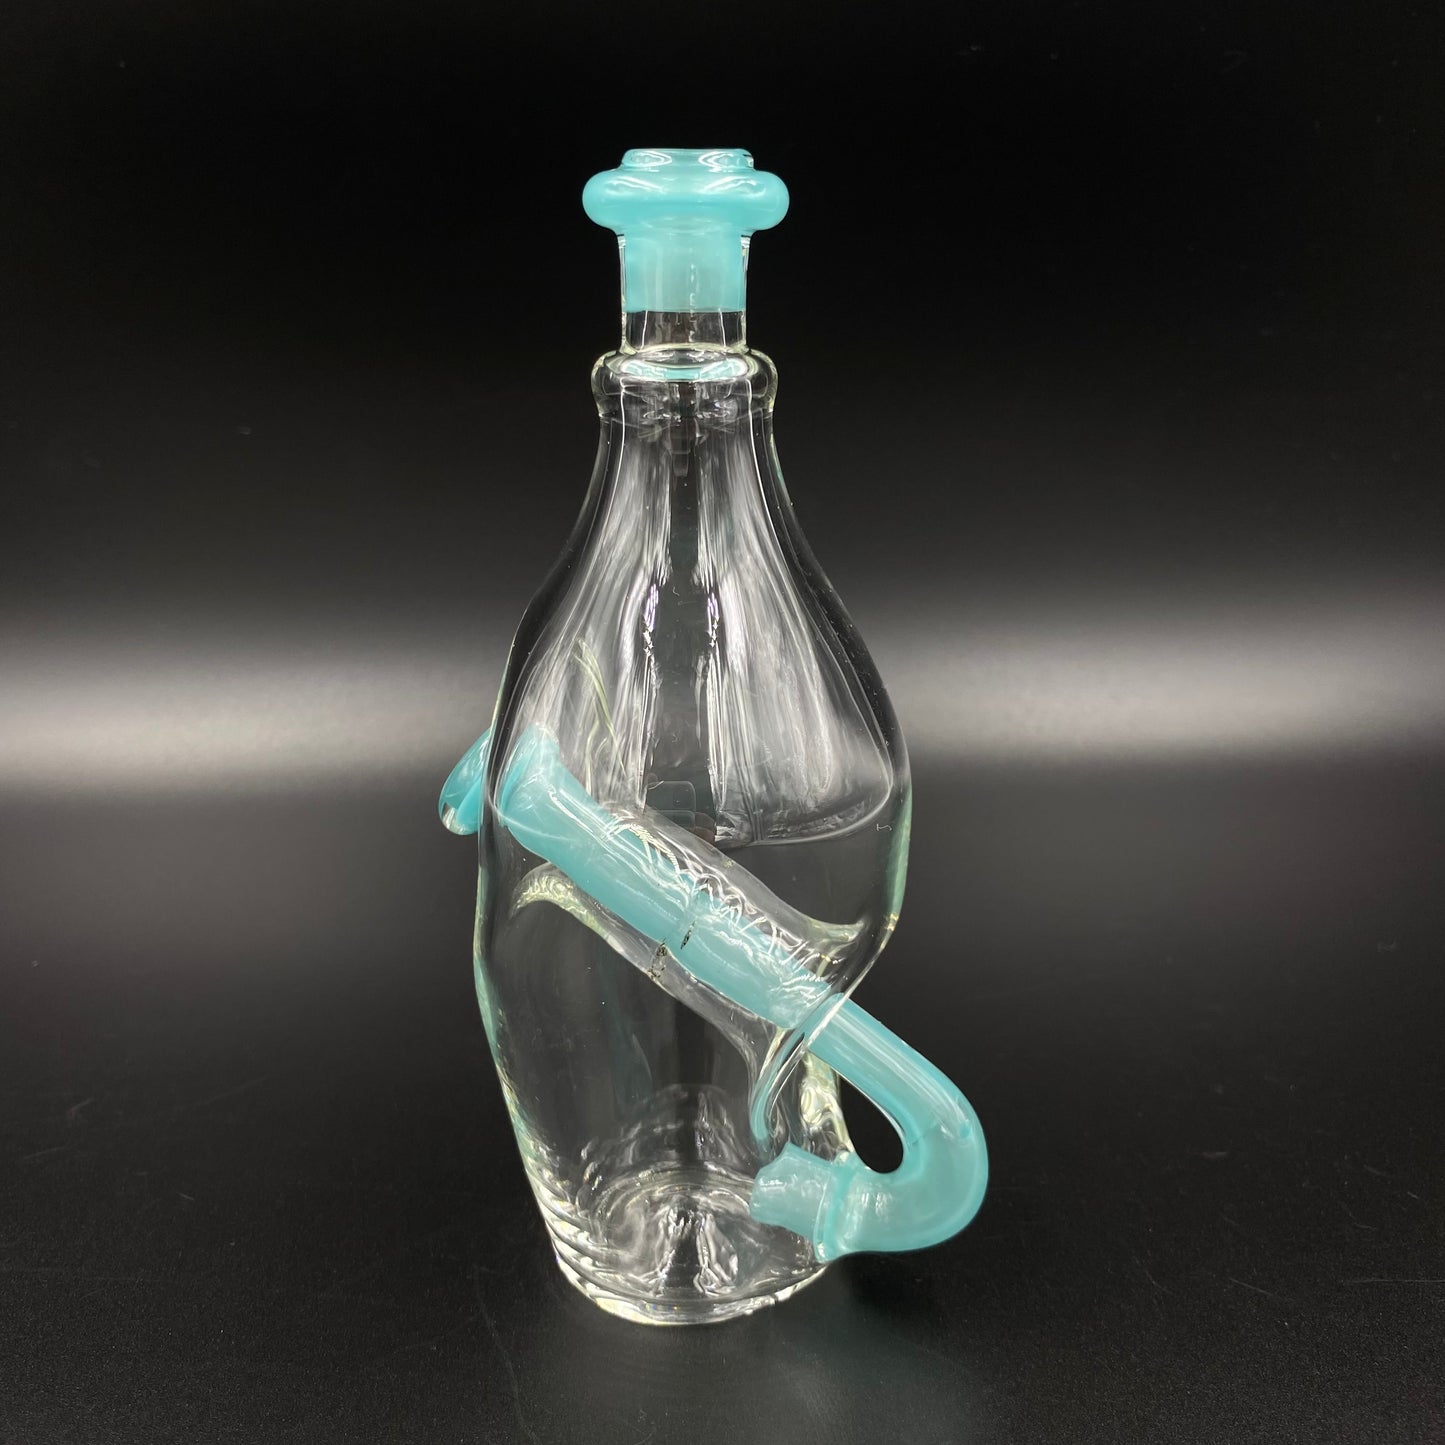 KSO Glass - Canteen